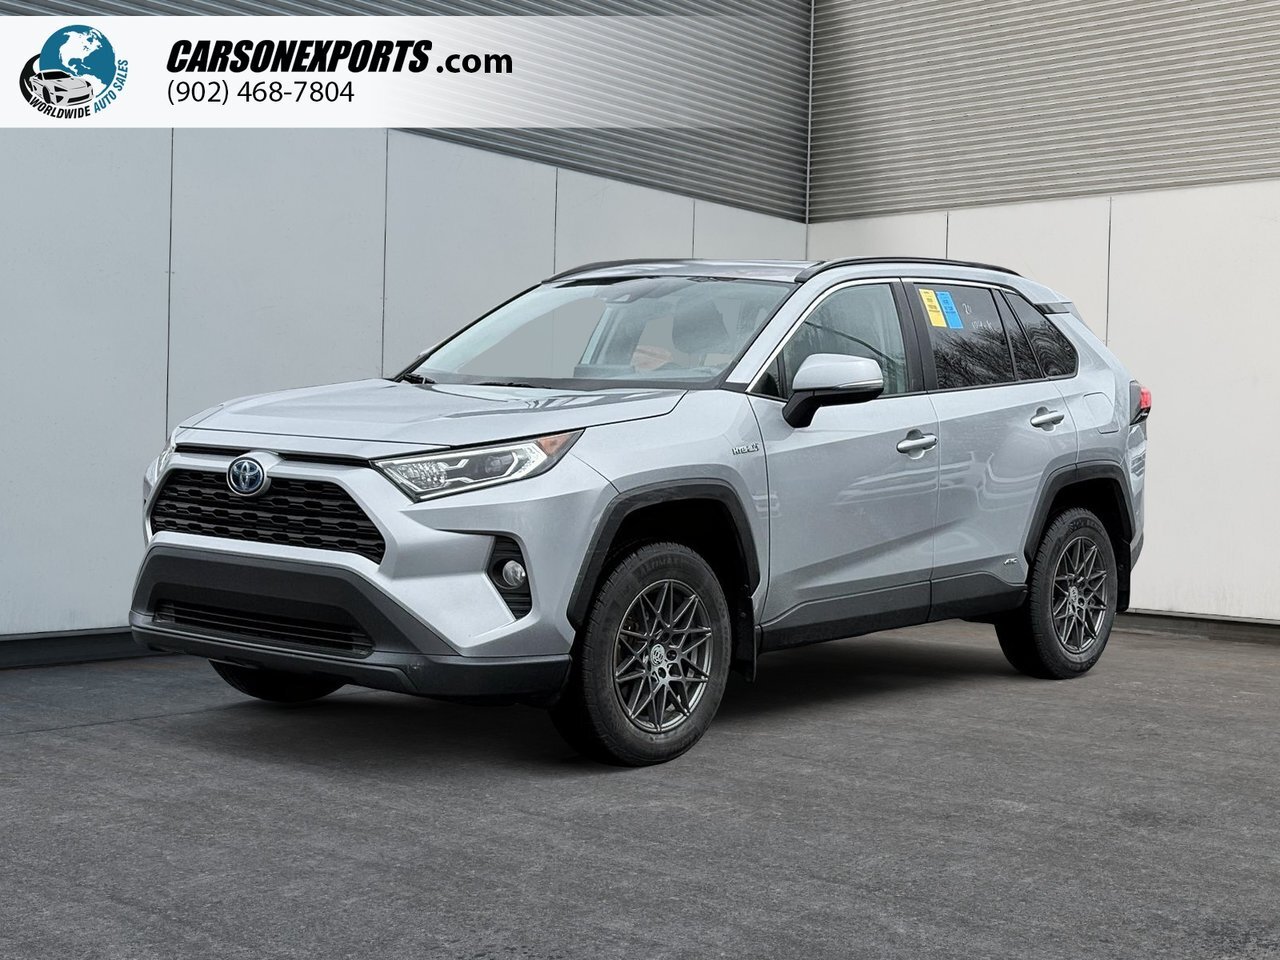 2020 Toyota RAV4 Hybrid XLE The best place to buy a used car. Period.